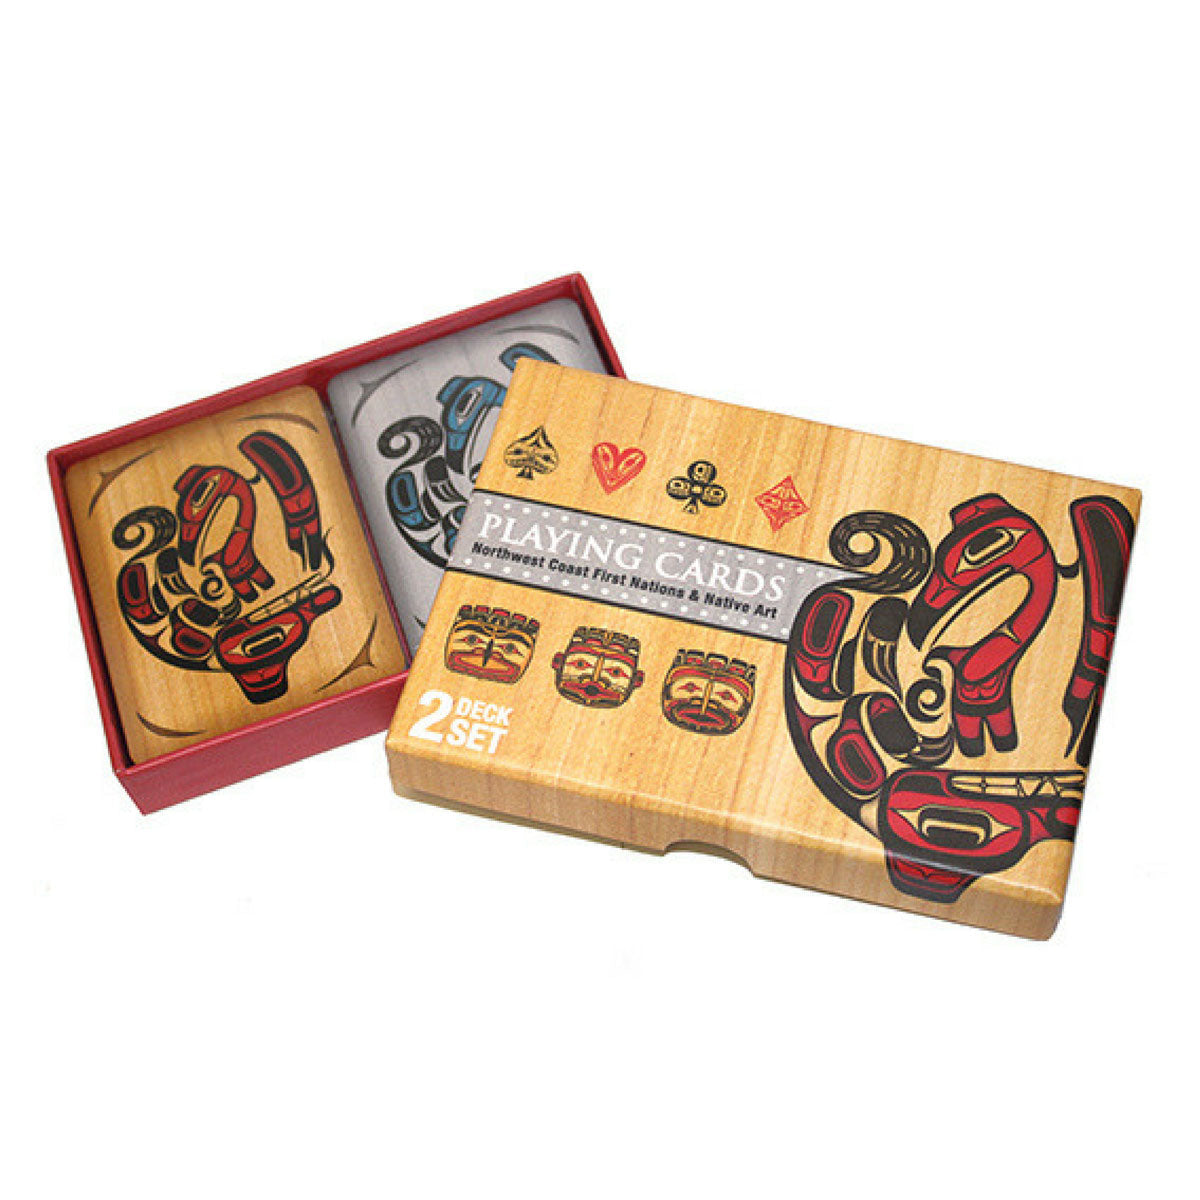 Playing Cards 2 Deck Set - Playing Cards 2 Deck Set -  - House of Himwitsa Native Art Gallery and Gifts